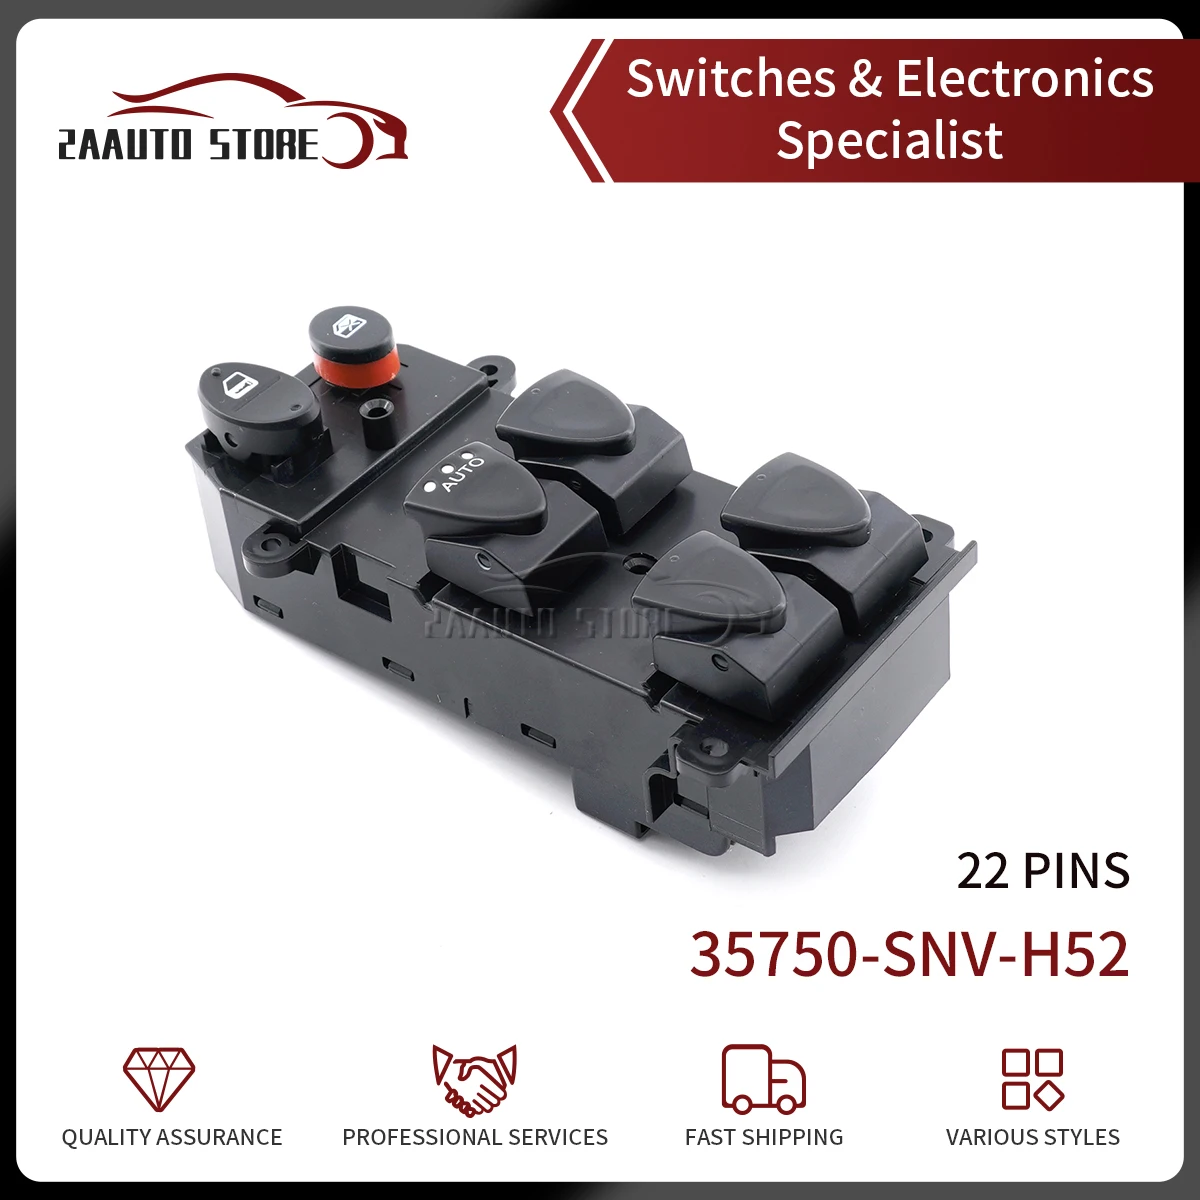 

35750-SNV-H52 Car Power Window Master Switch Button For Honda Civic CR-V 2006 2007 2008 2009 2010 35750-SNA-A11 35750SNVH52